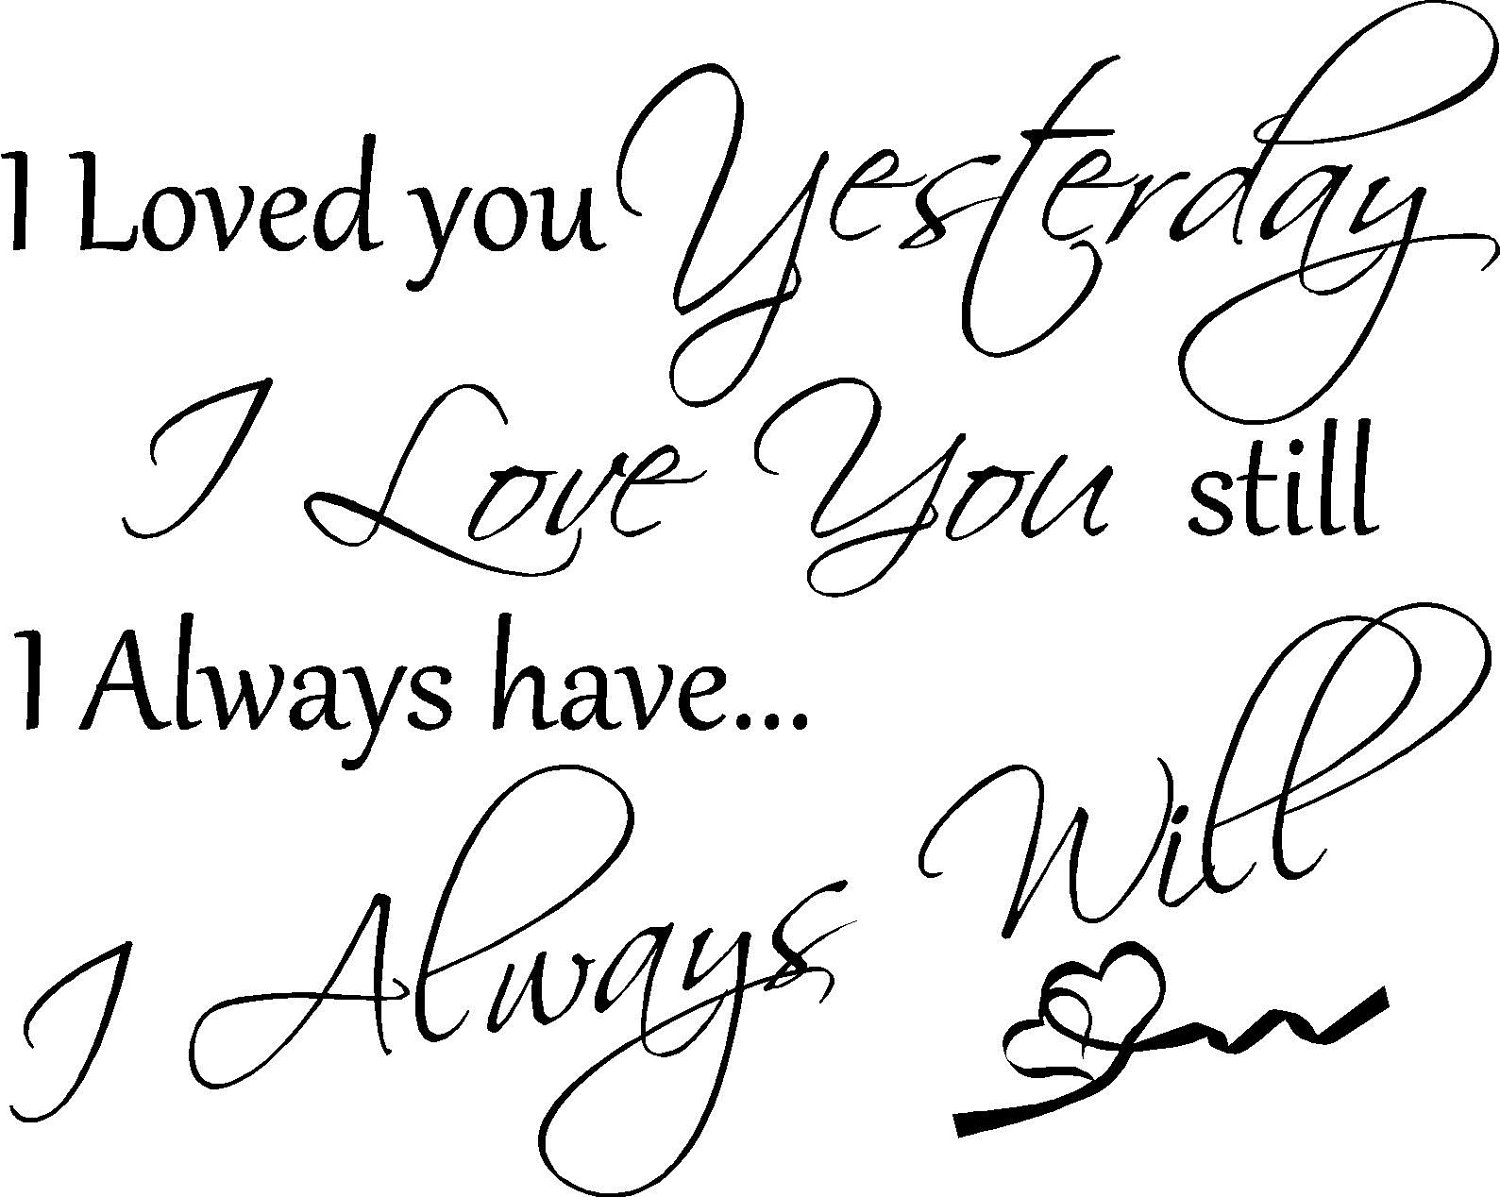 19 love you picture quotes quote i loved you yesterday love still